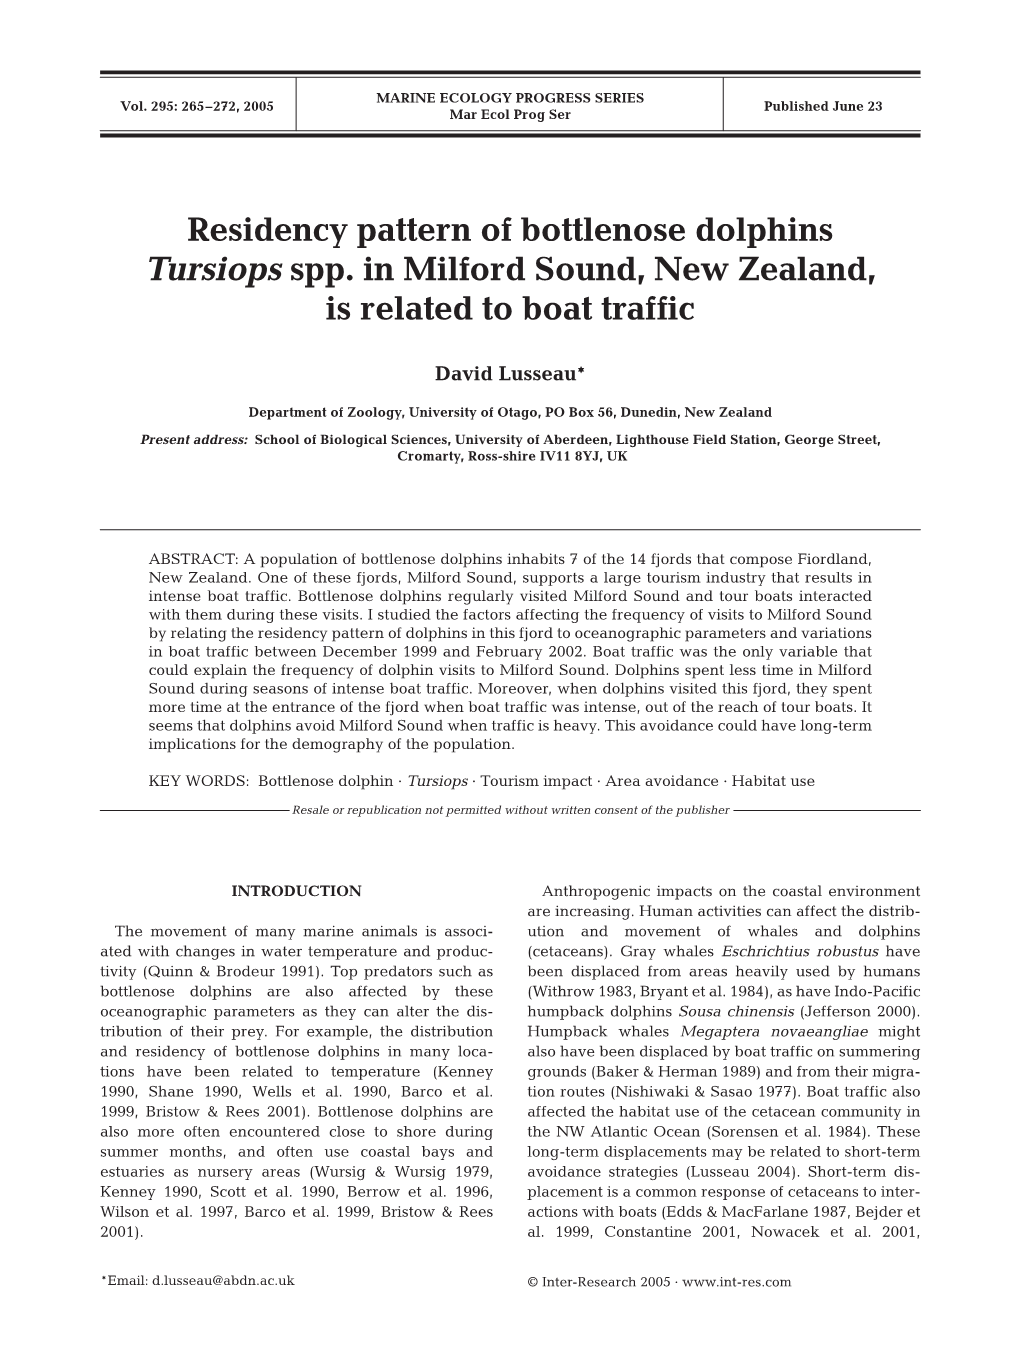 Residency Pattern of Bottlenose Dolphins Tursiops Spp. in Milford Sound, New Zealand, Is Related to Boat Traffic